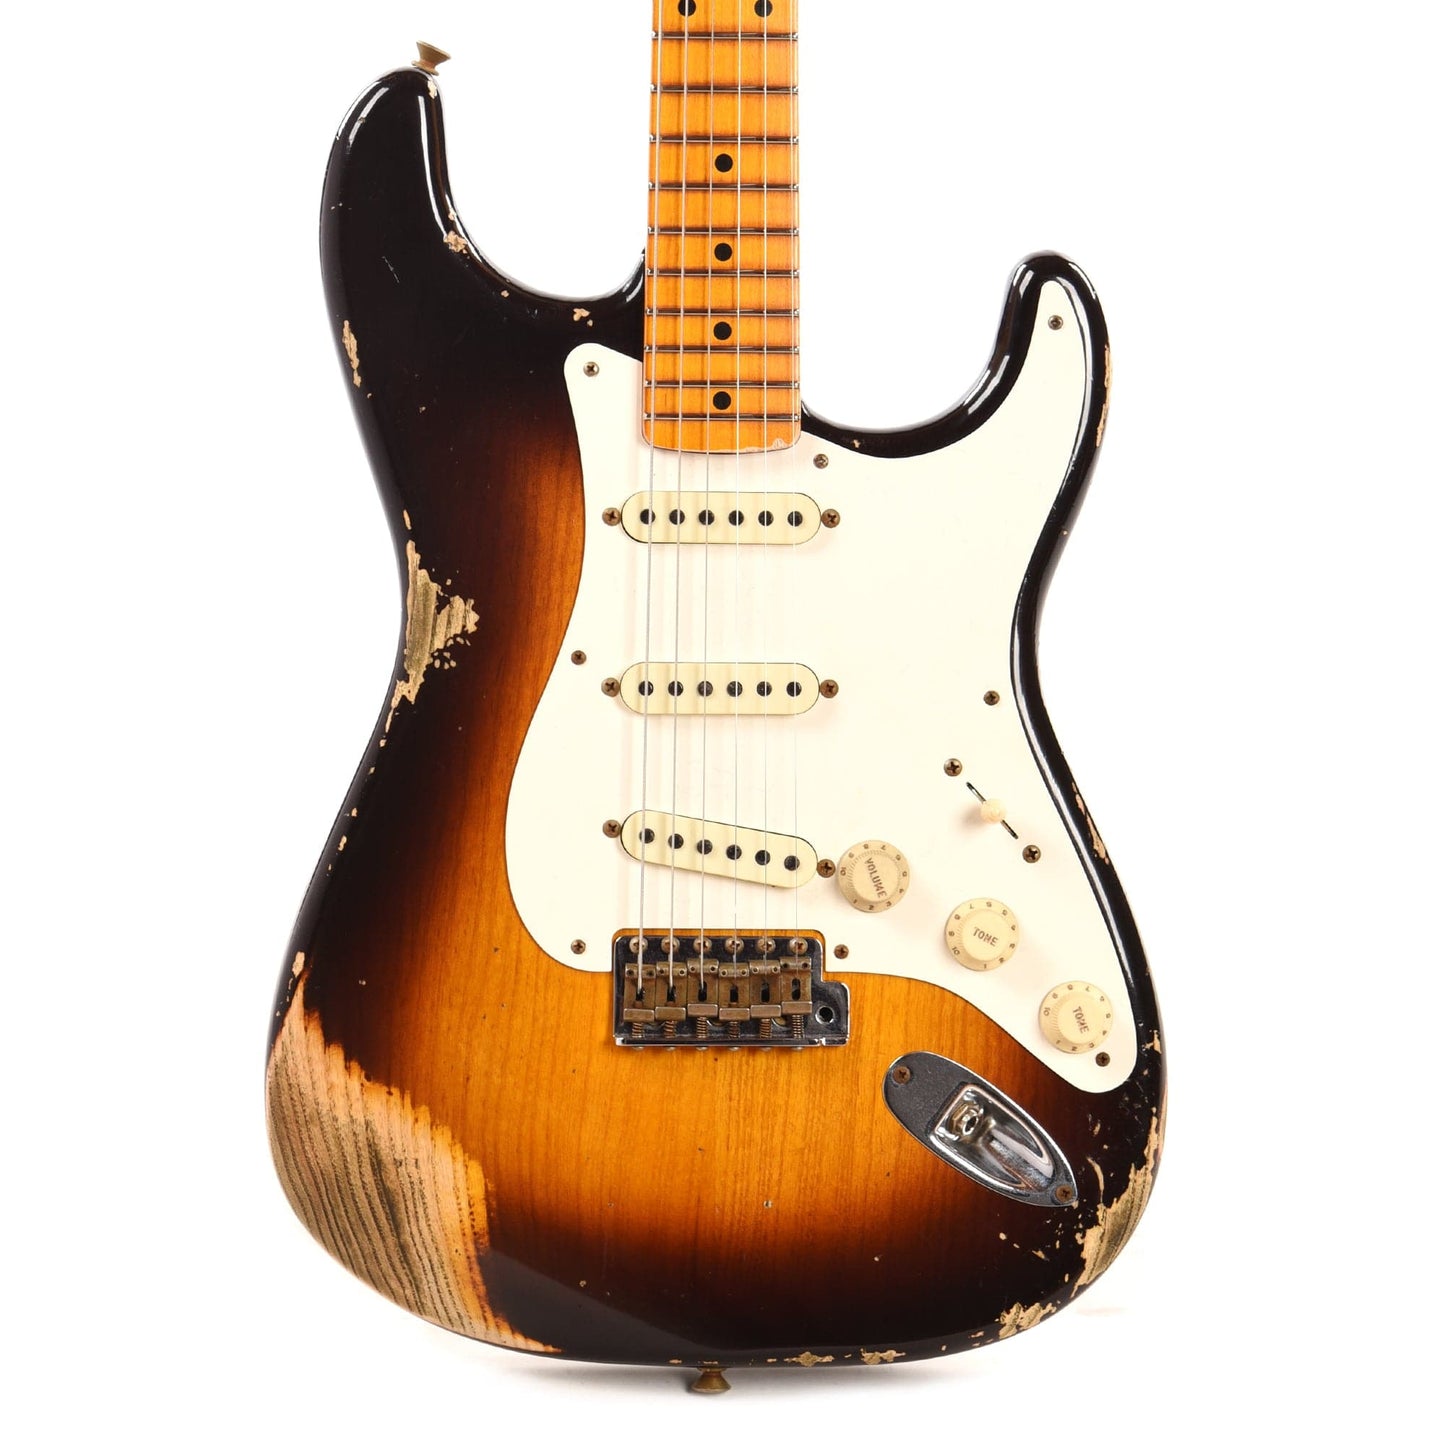 Fender Custom Shop 1957 Stratocaster "Chicago Special" Heavy Relic Aged Wide Fade Chocolate 2-Tone Sunburst Electric Guitars / Solid Body